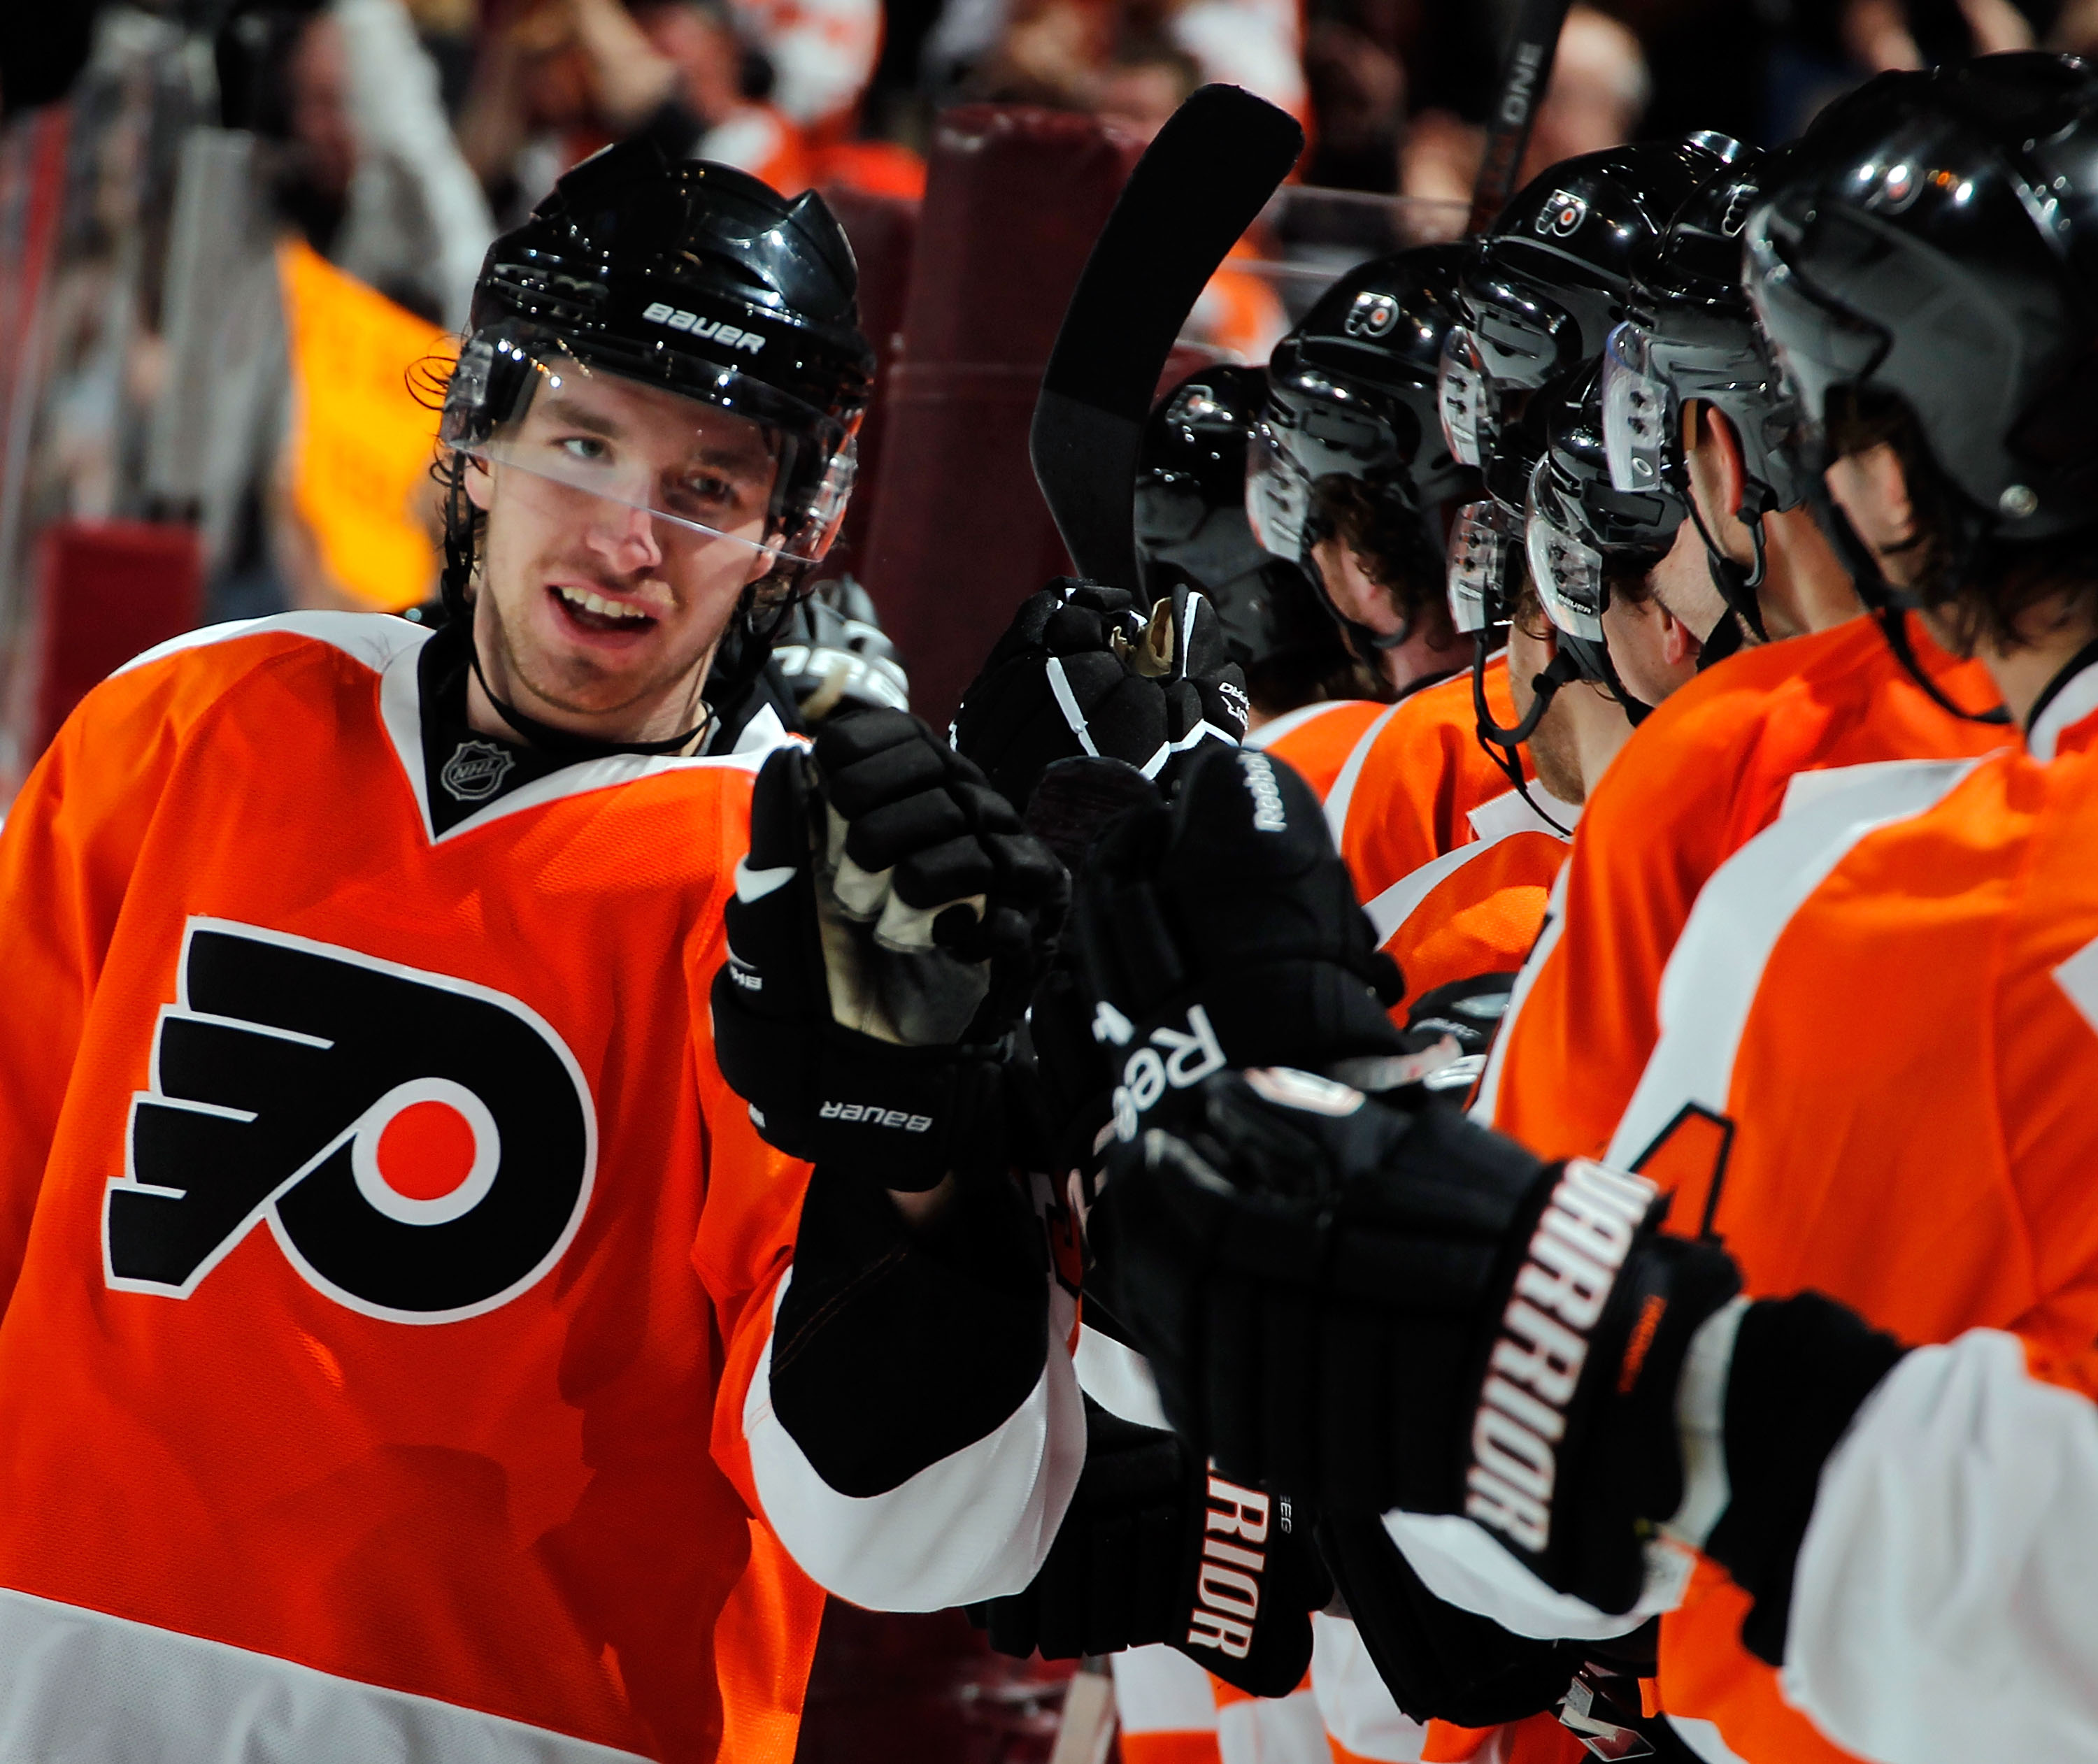 Q&A: Injured Flyers forward Ian Laperriere